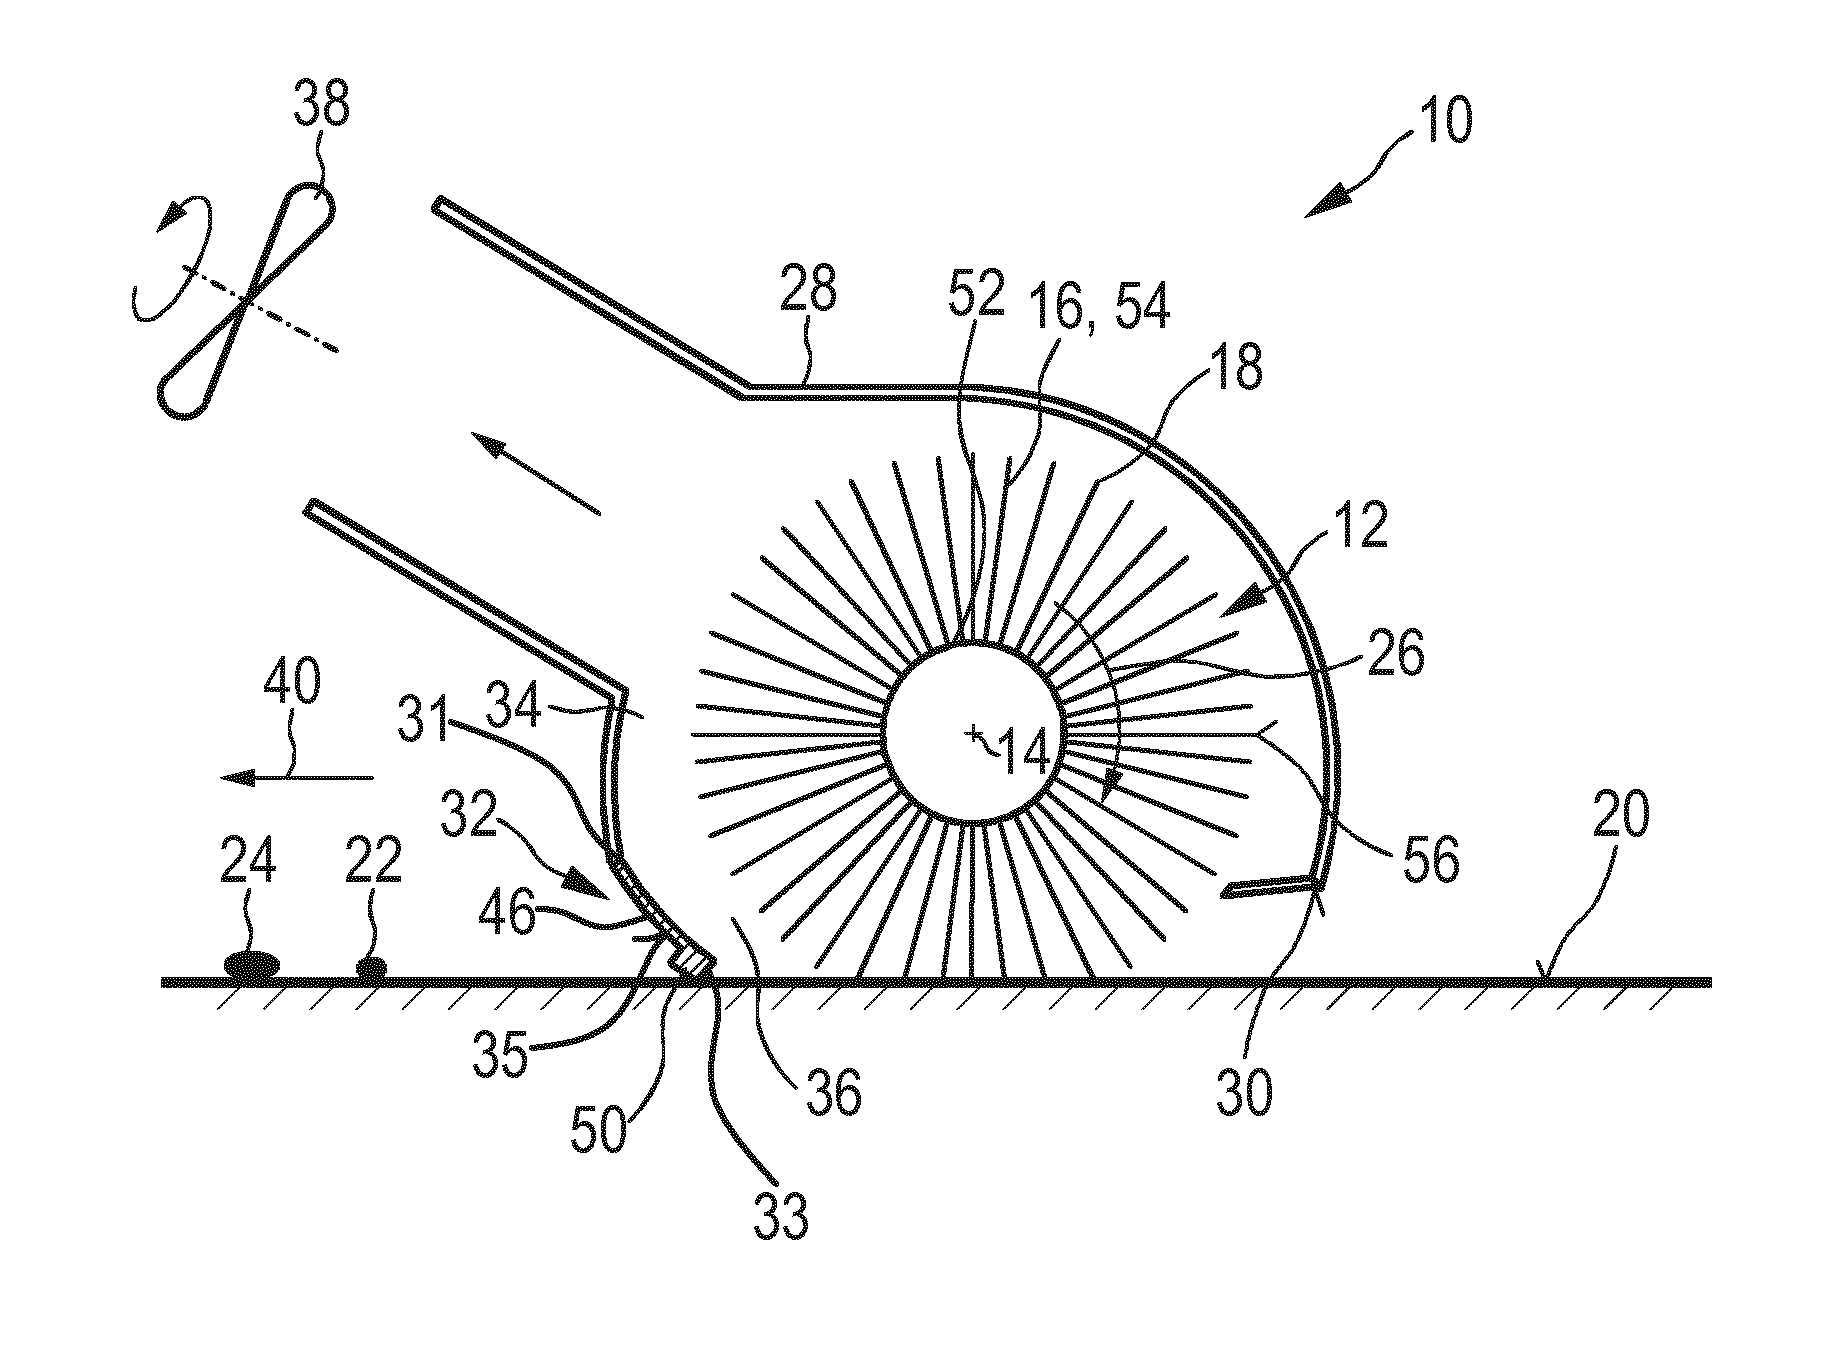 Nozzle arrangement with brush and squeegee